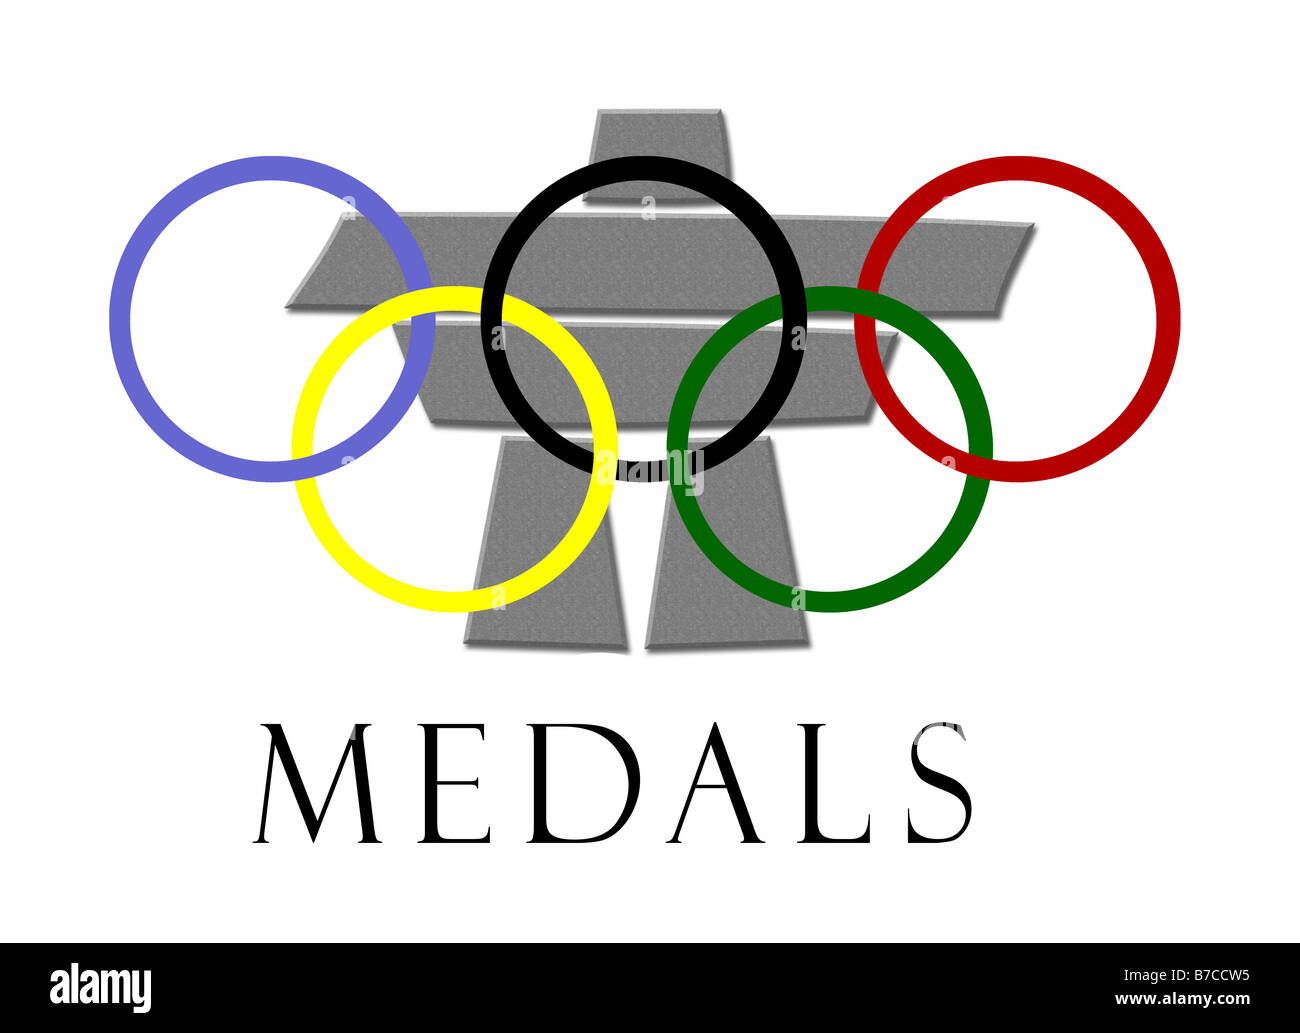 Graphic depicting Vancouver British Columbia Canada 2010 Olympics medals with olympic rings Stock Photo